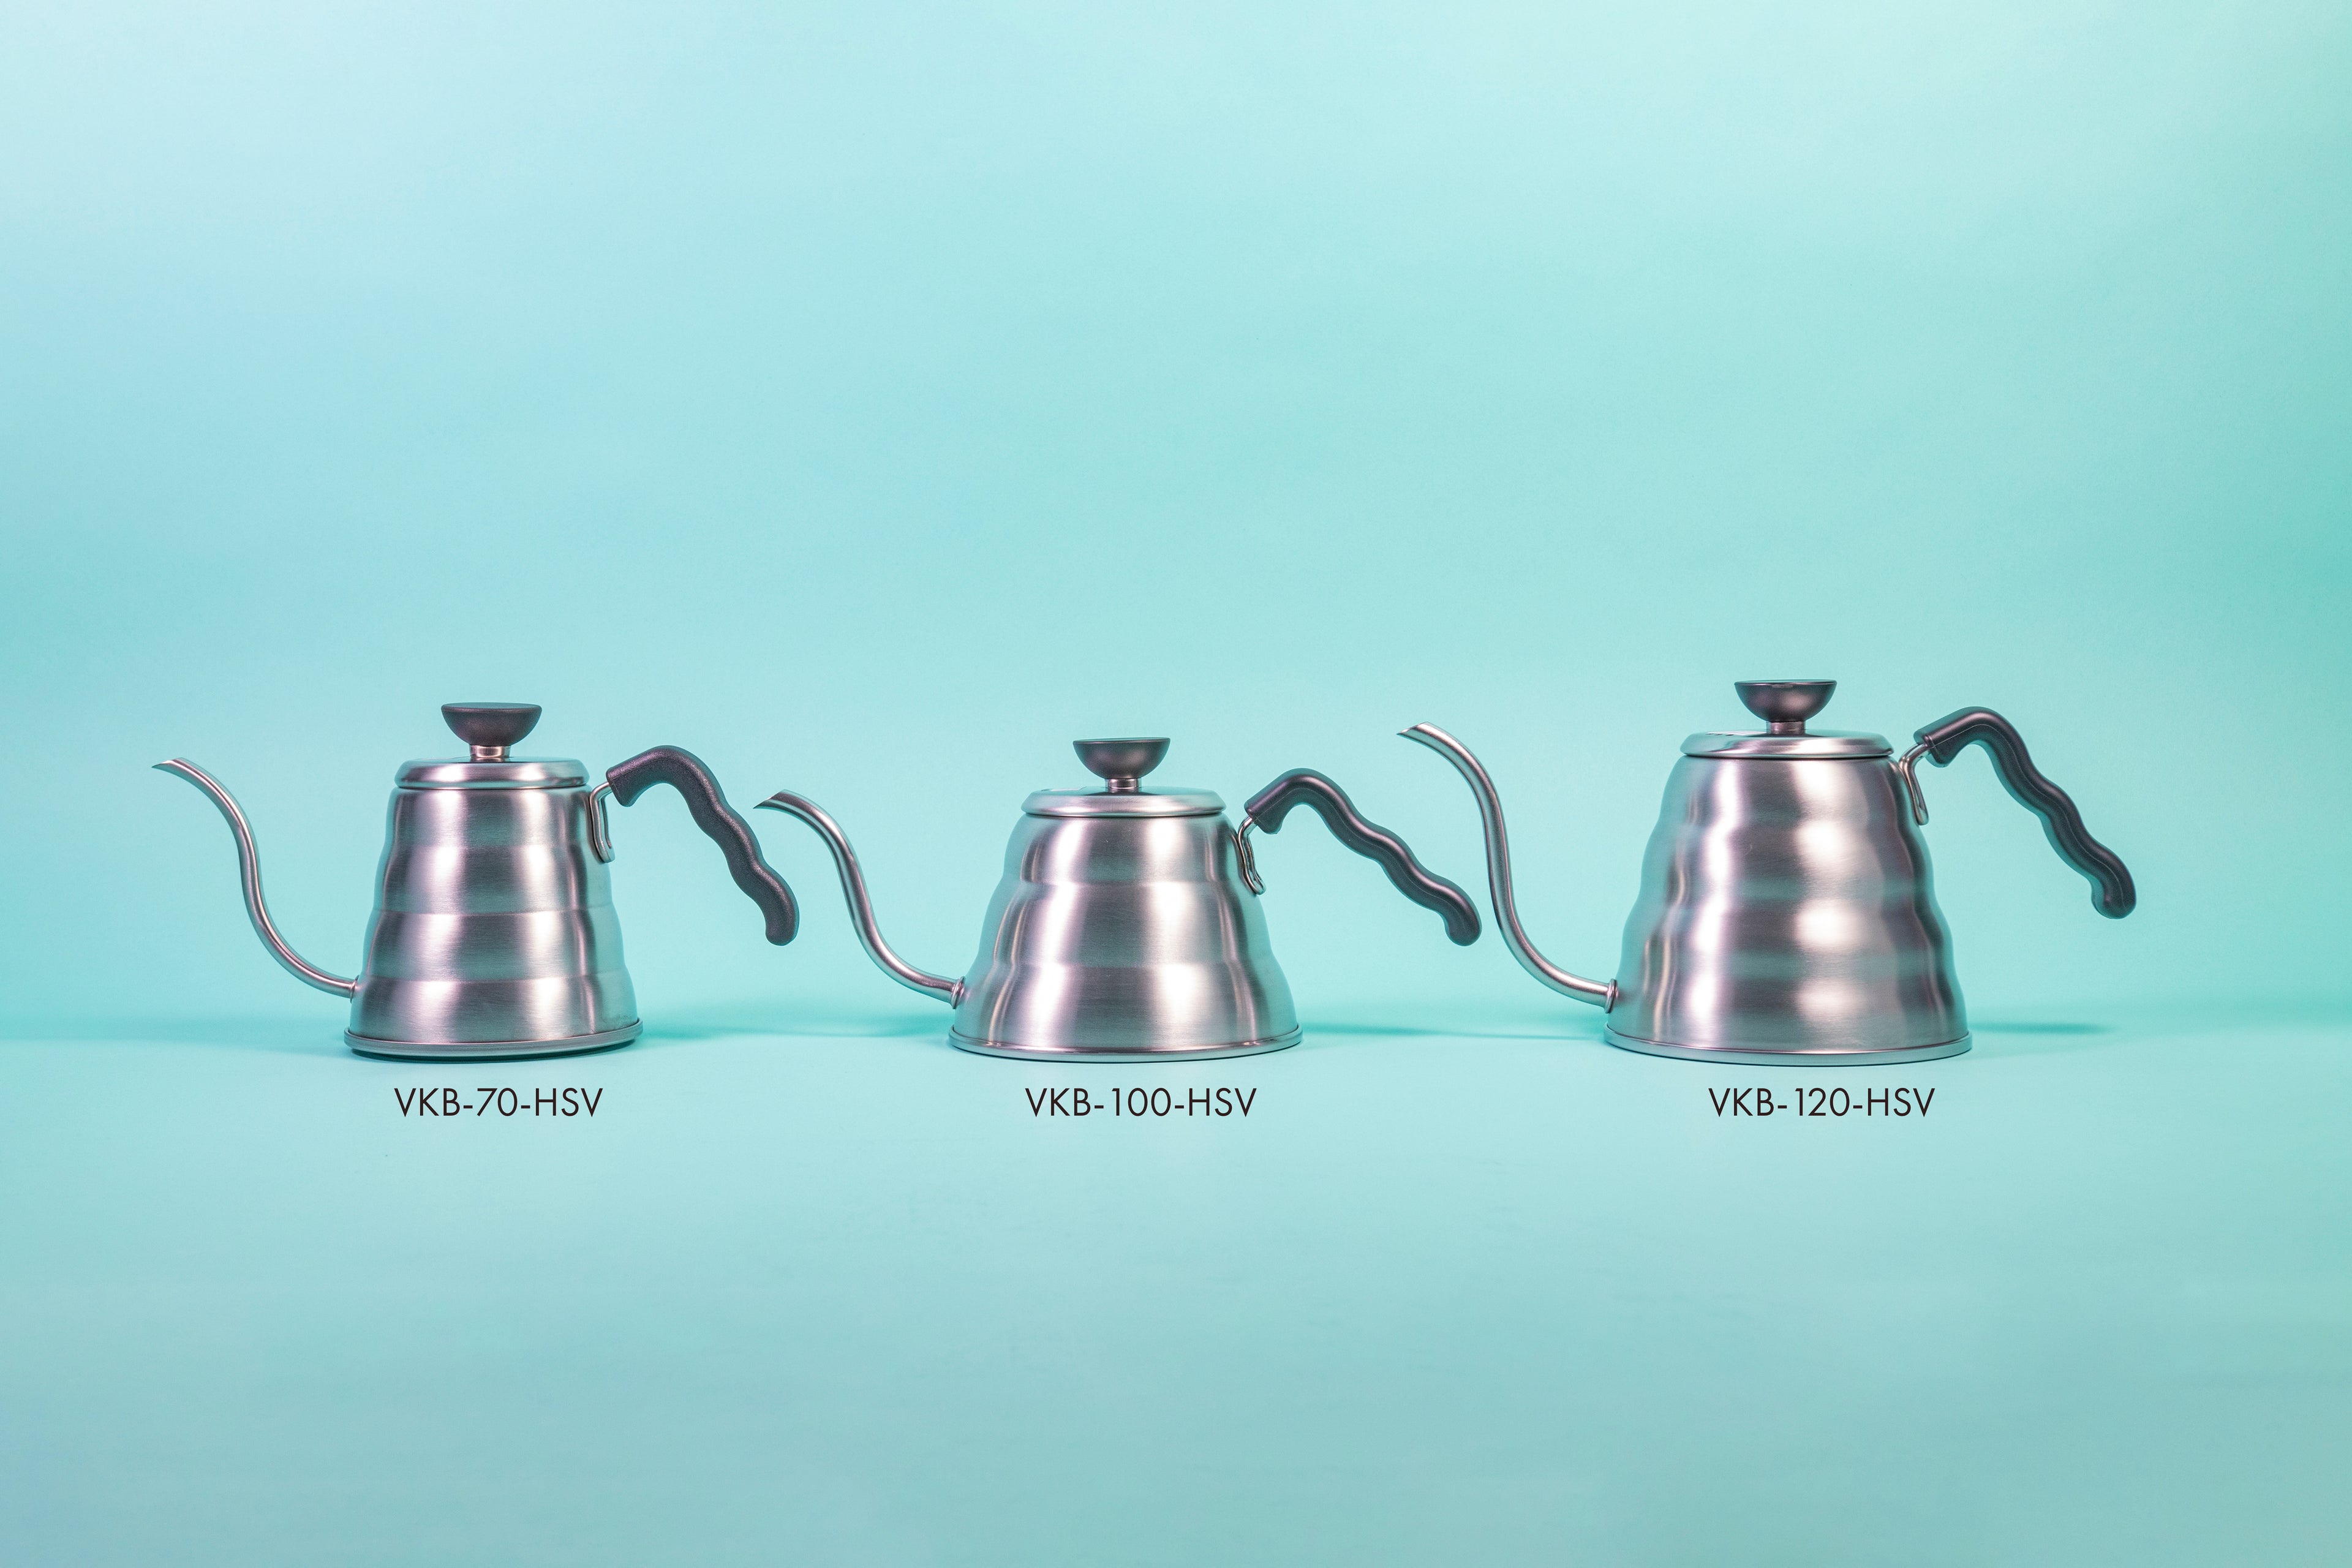 Three silver beehive-shaped stainless steel kettles of varying sizeswith wave-shaped black plastic handles and round black plastic lid knobs with flat tops set against a light blue background.